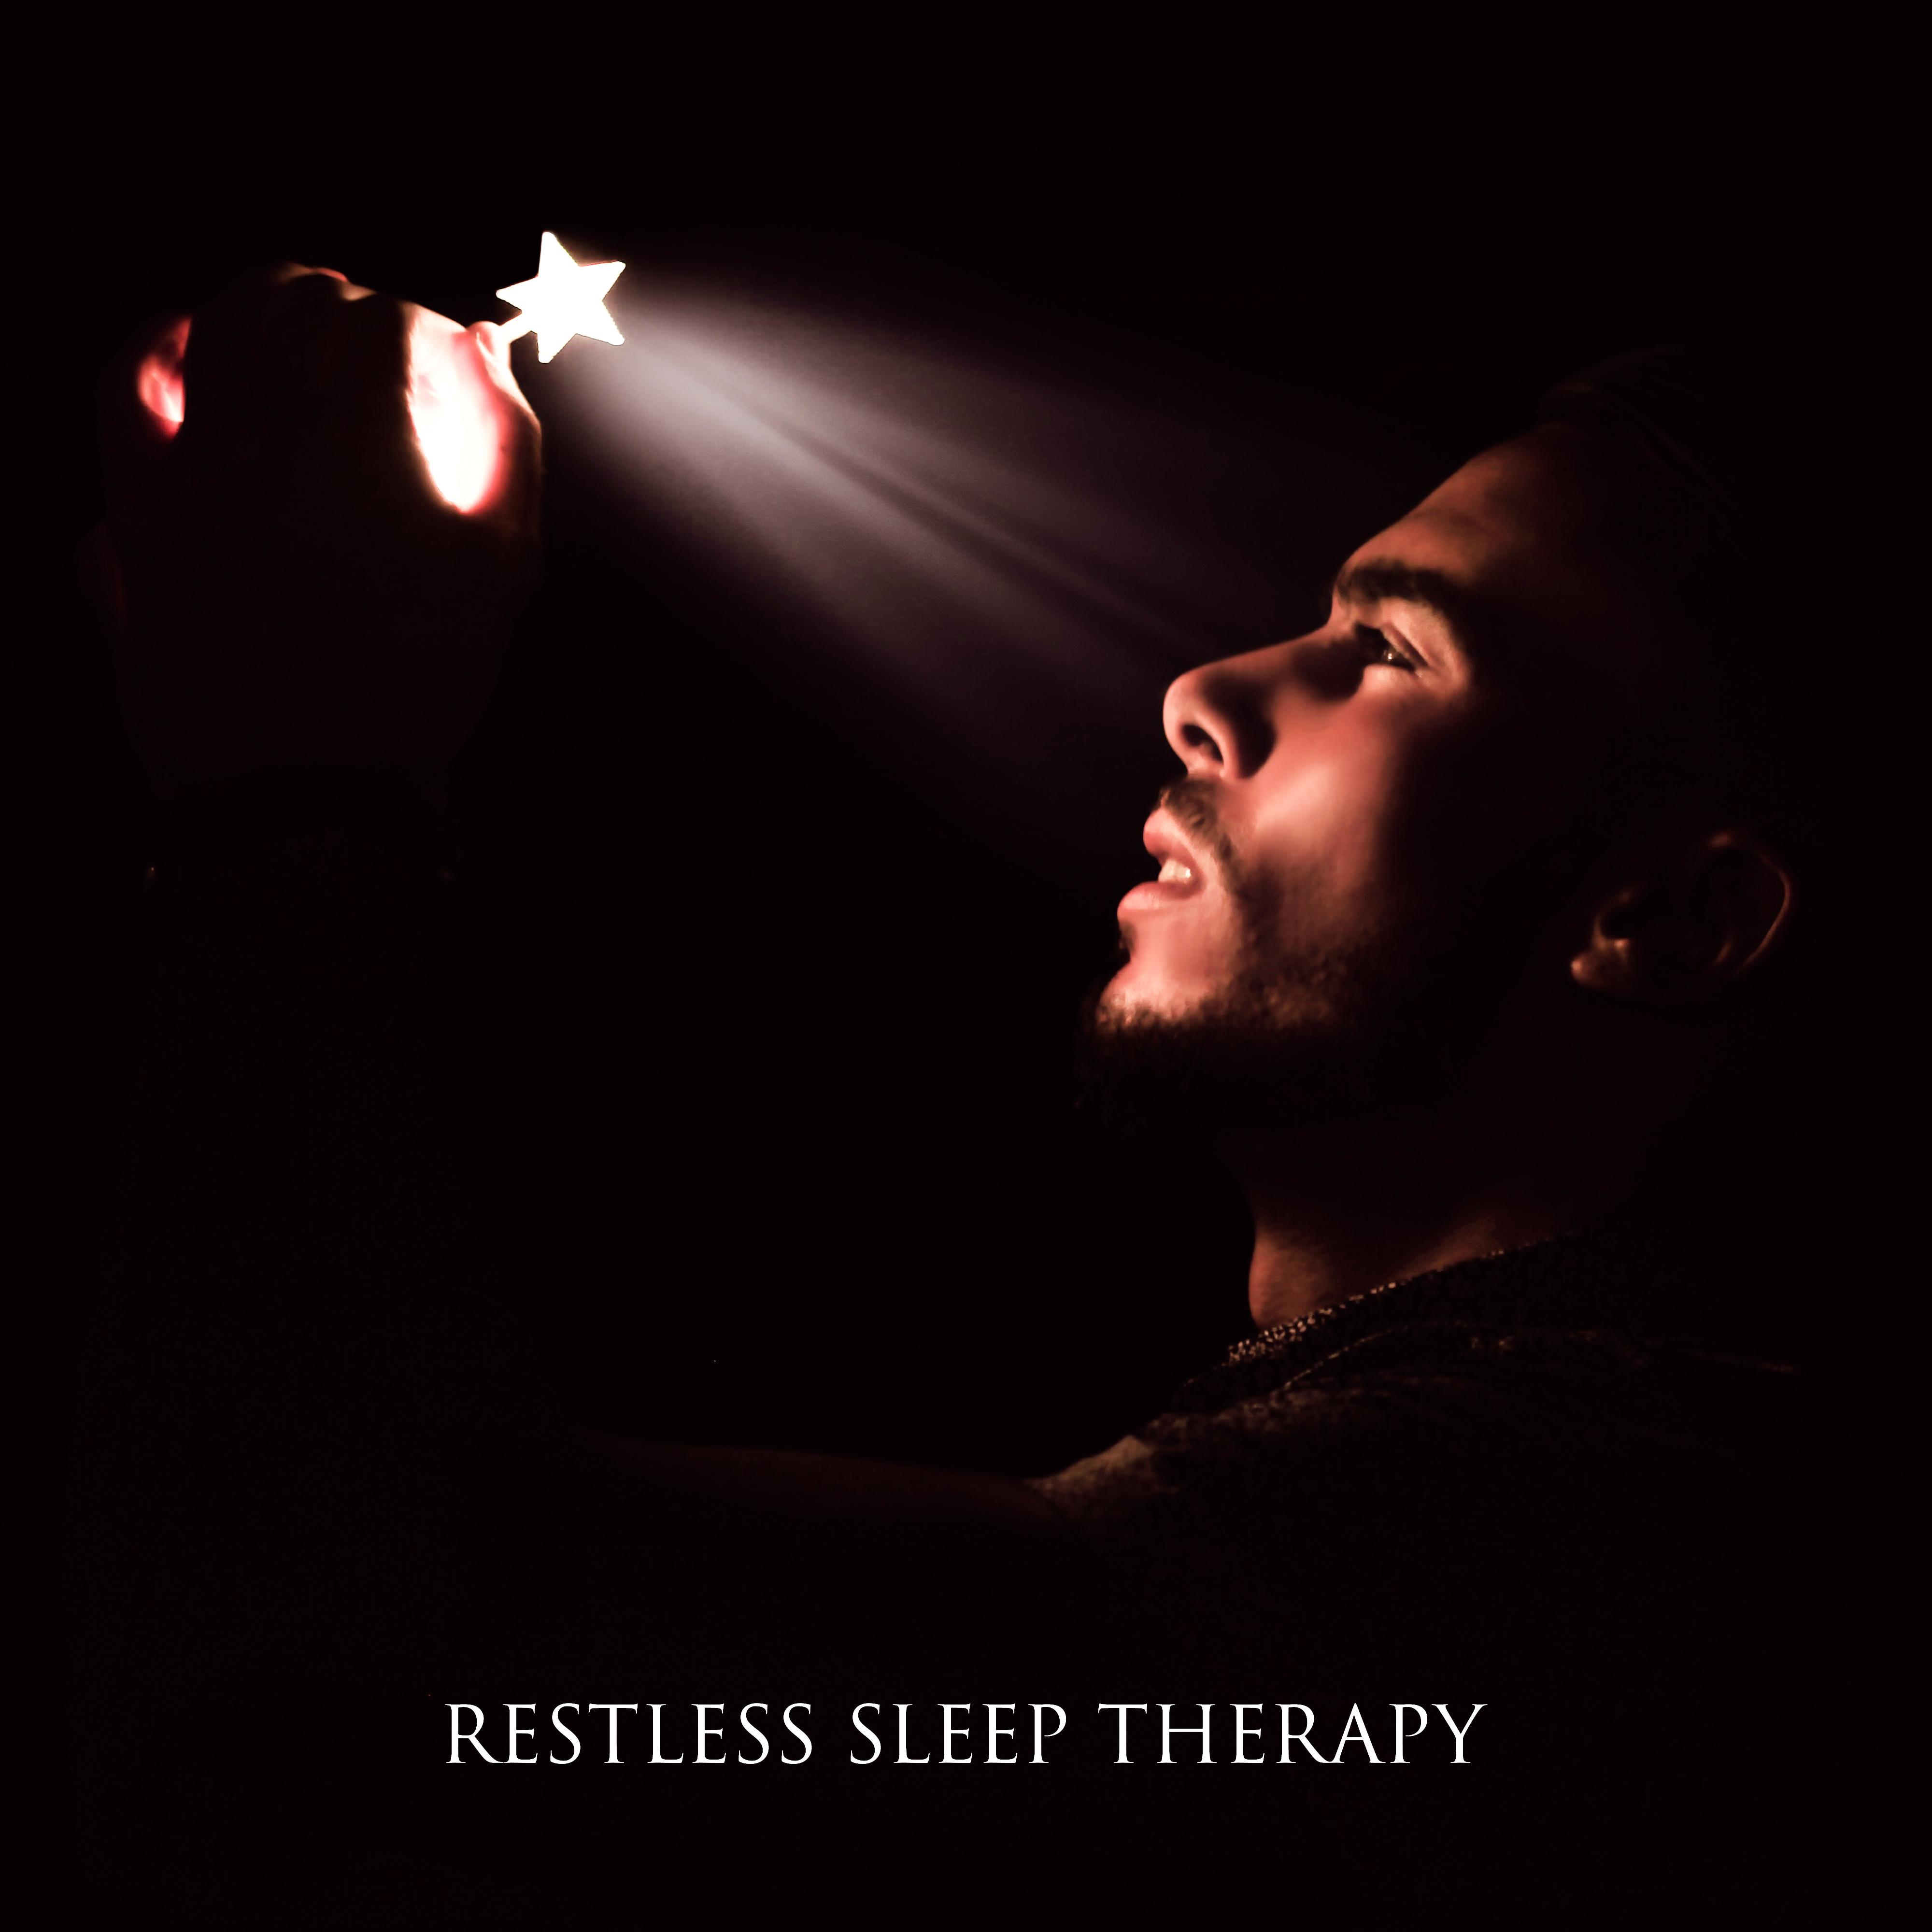 Restless Sleep Therapy  Therapy Music for Restless Sleep, Cure Insomnia, Relief Stress, Reduce Anxiety, Deep Sleep